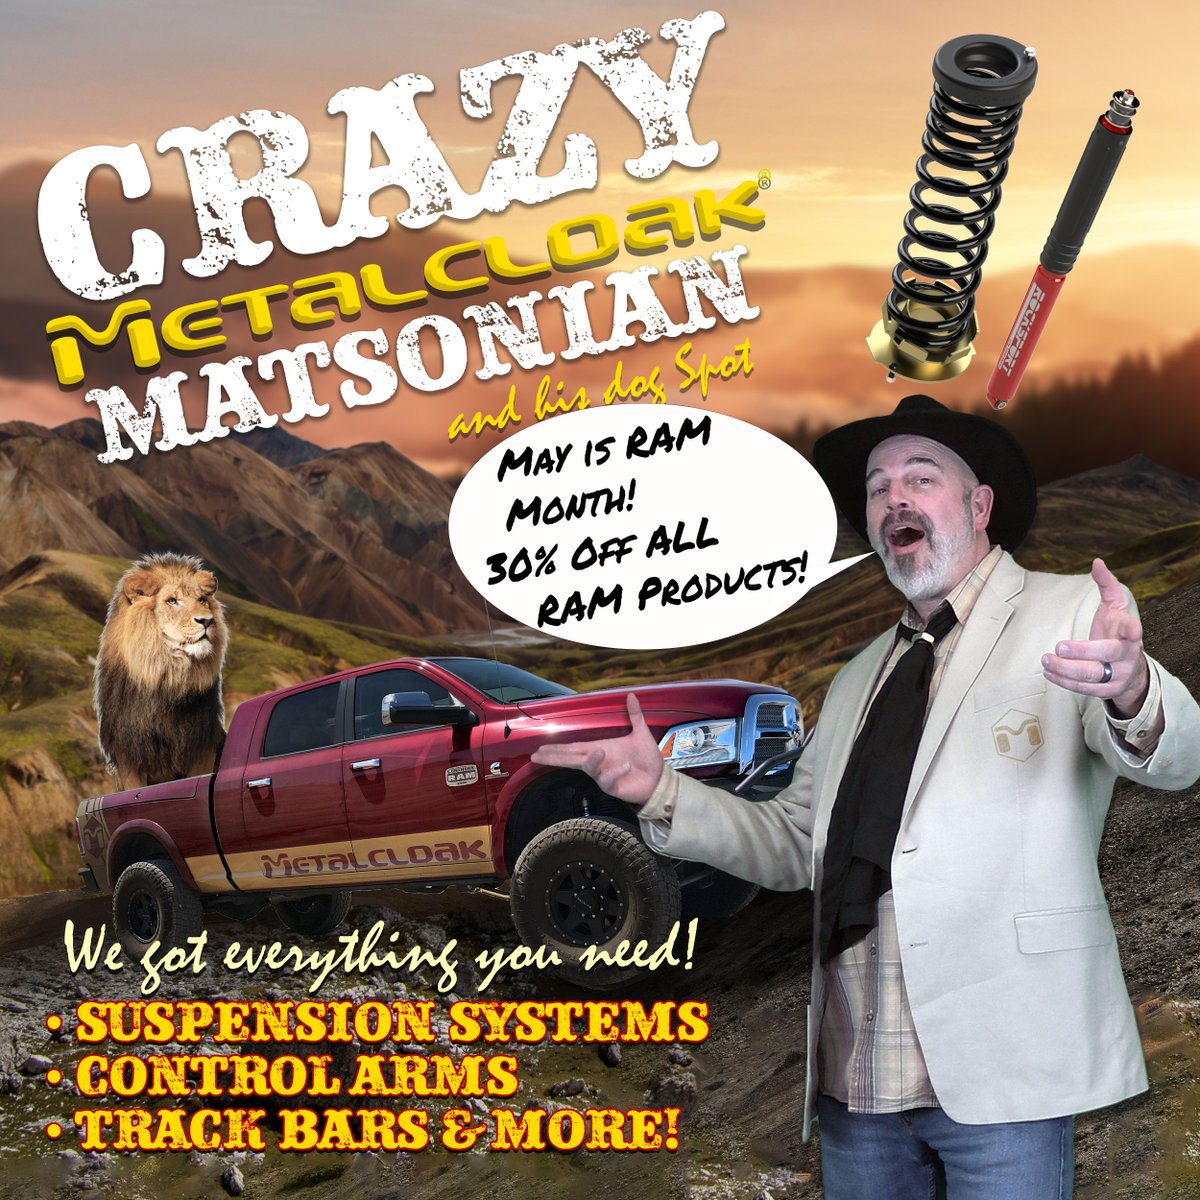 Hold onto your hats, folks! Crazy Matsonian is at it again! A whopping 30% off on all RAM truck suspension essentials for the wild ride we call May. Be sure to check out our new 3.5' RAM kits!

Shop now:  metalcloak.com or give us a call 916.631.8071